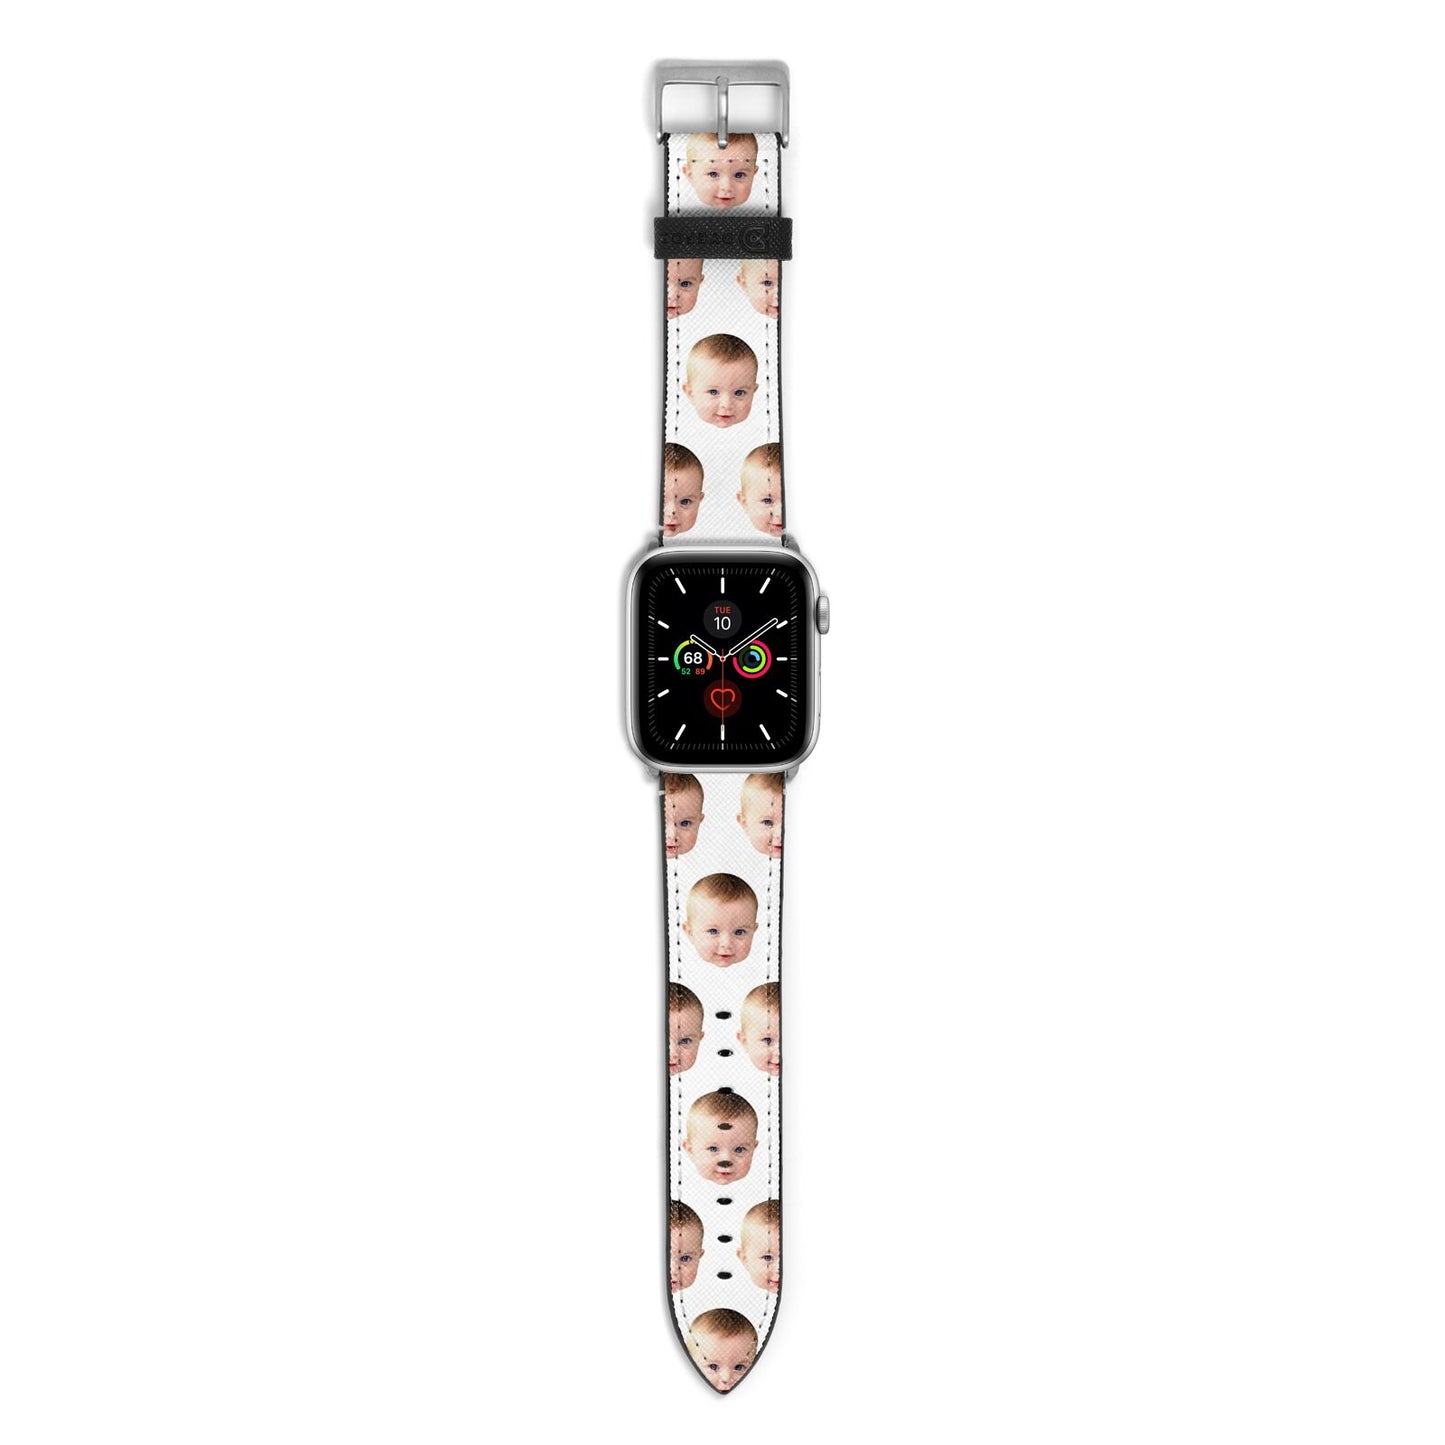 Baby Face Apple Watch Strap with Silver Hardware